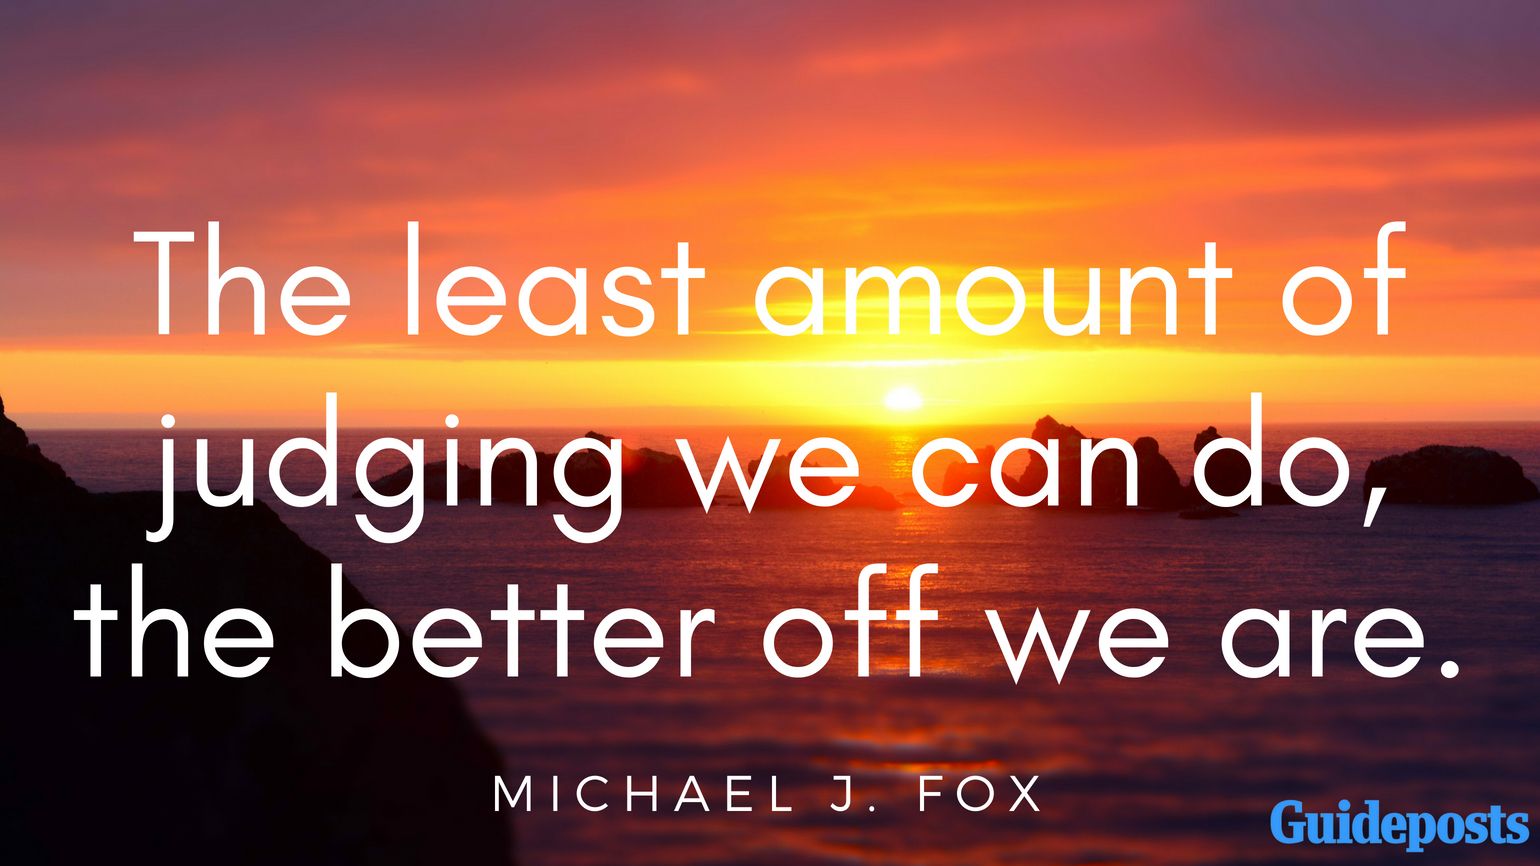 The least amount of judging we can do, the better off we are. - Michael J. Fox